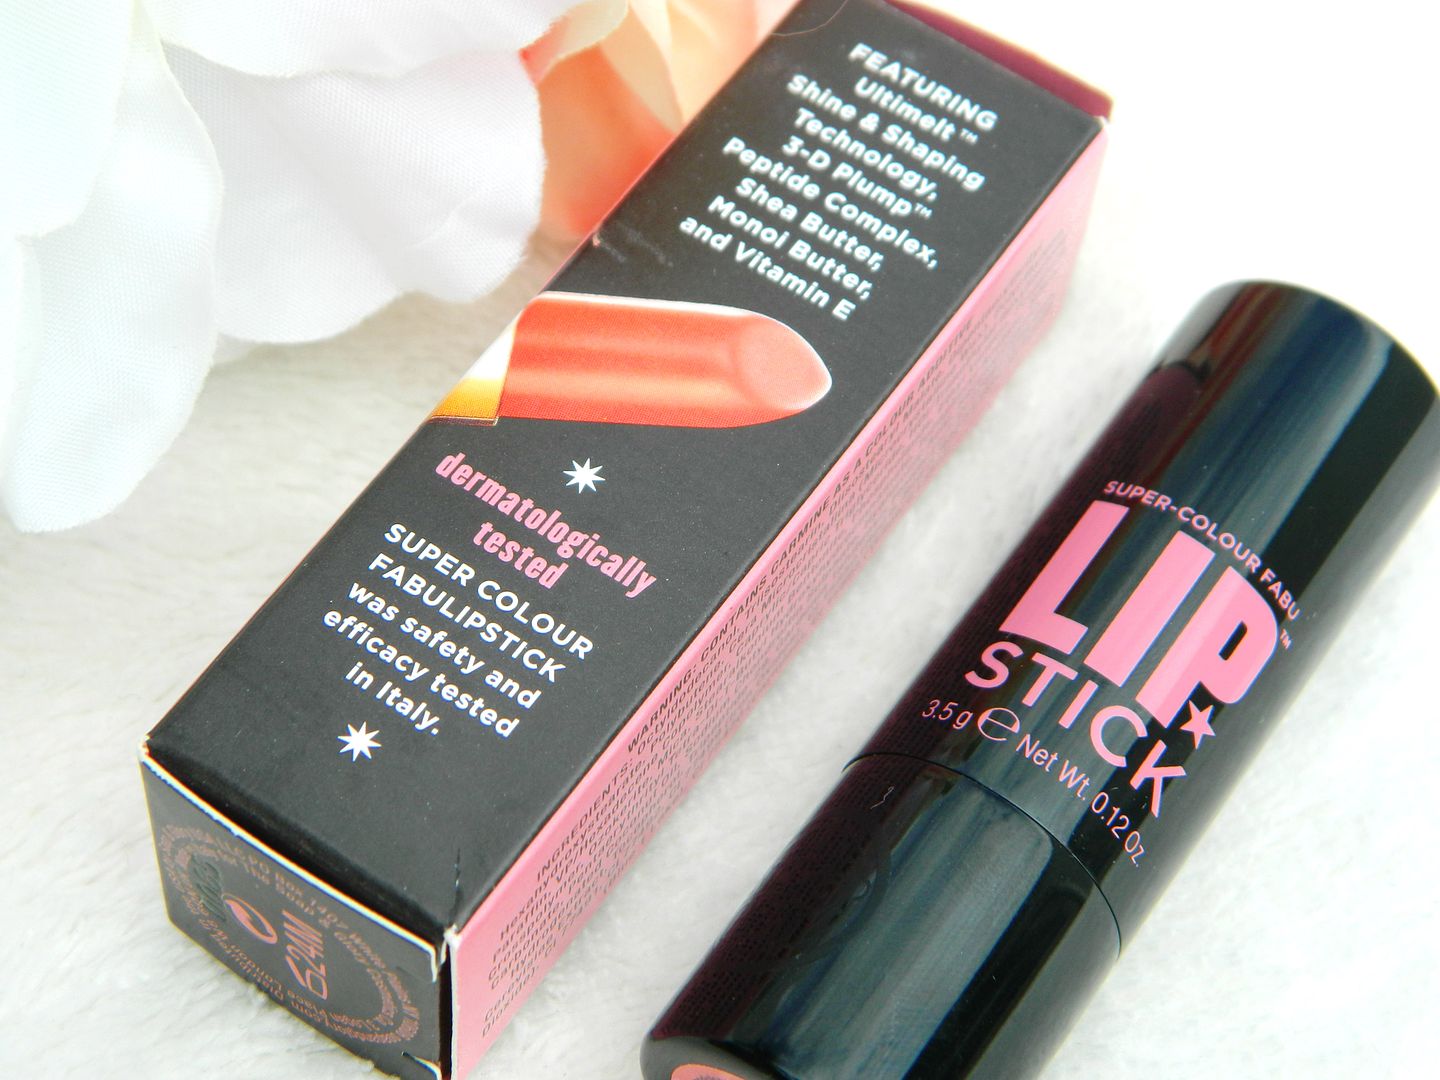 Soap And Glory Super Colour Fabu Lipstick In The Missing Pink Satin Finish Packaging Lipstick Tube Review Belle Amie UK Beauty Fashion Lifestyle Blog